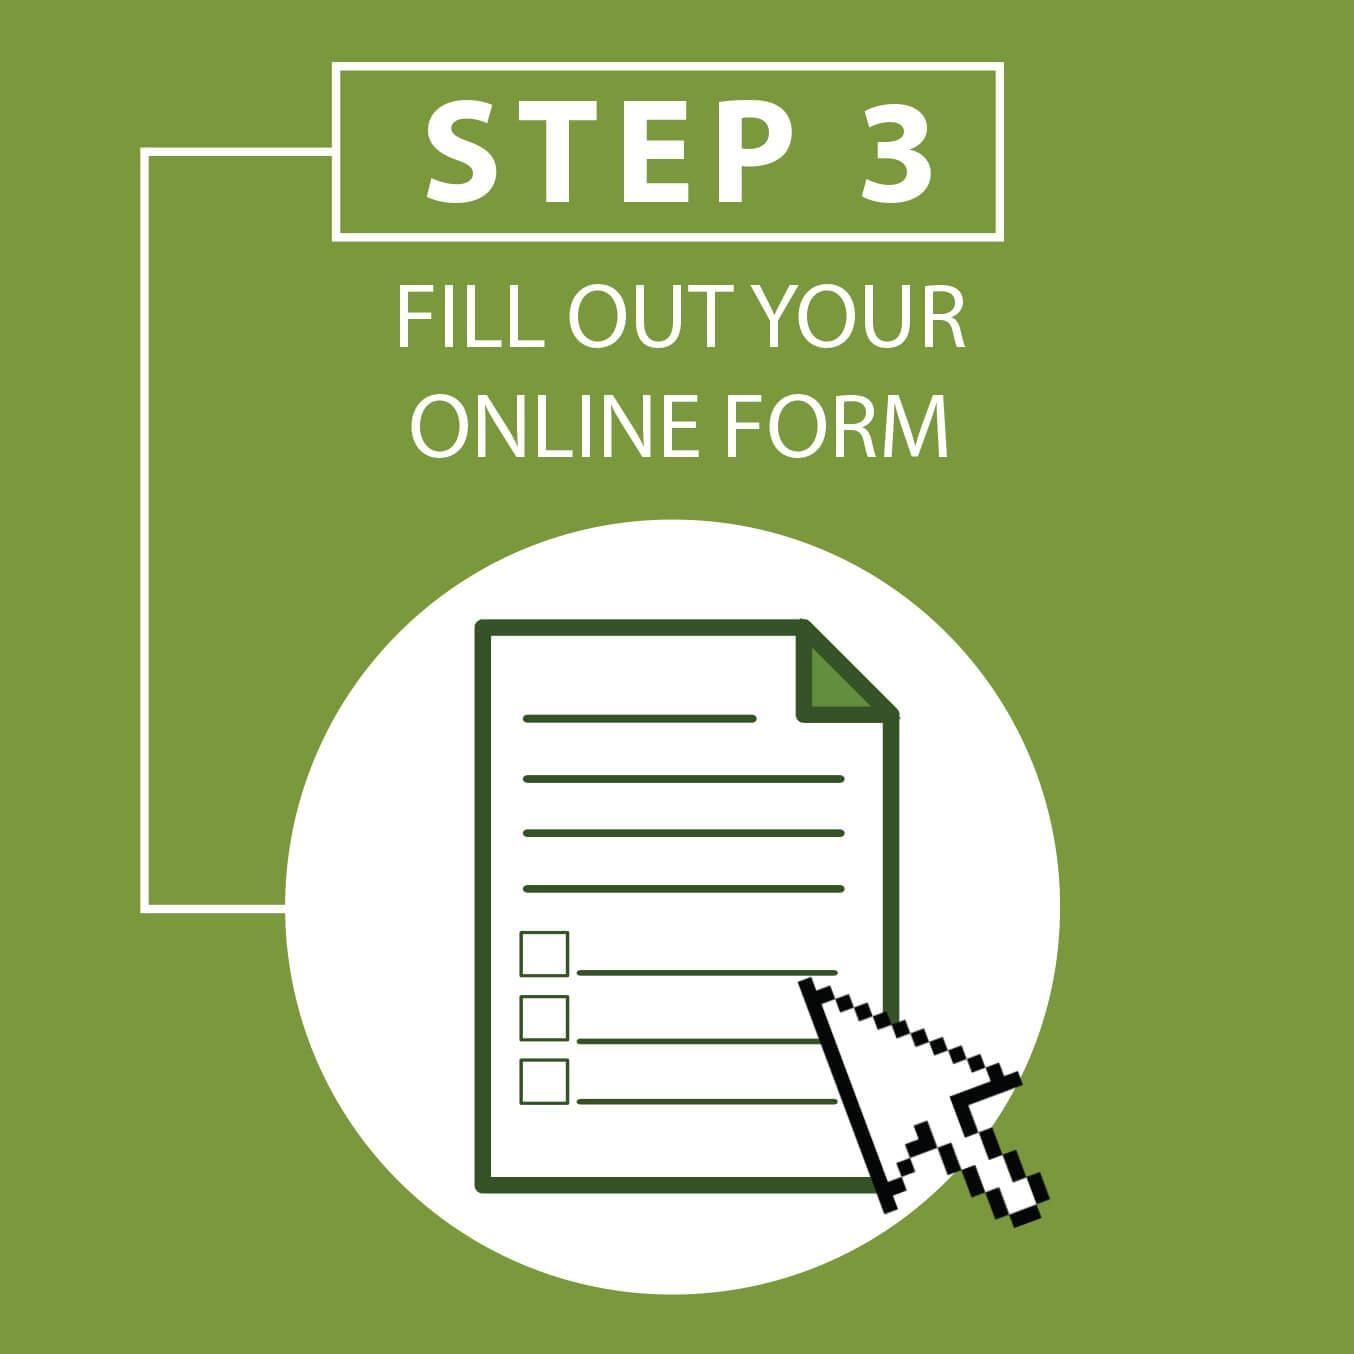 Step 3: Fill Out Your Online Form